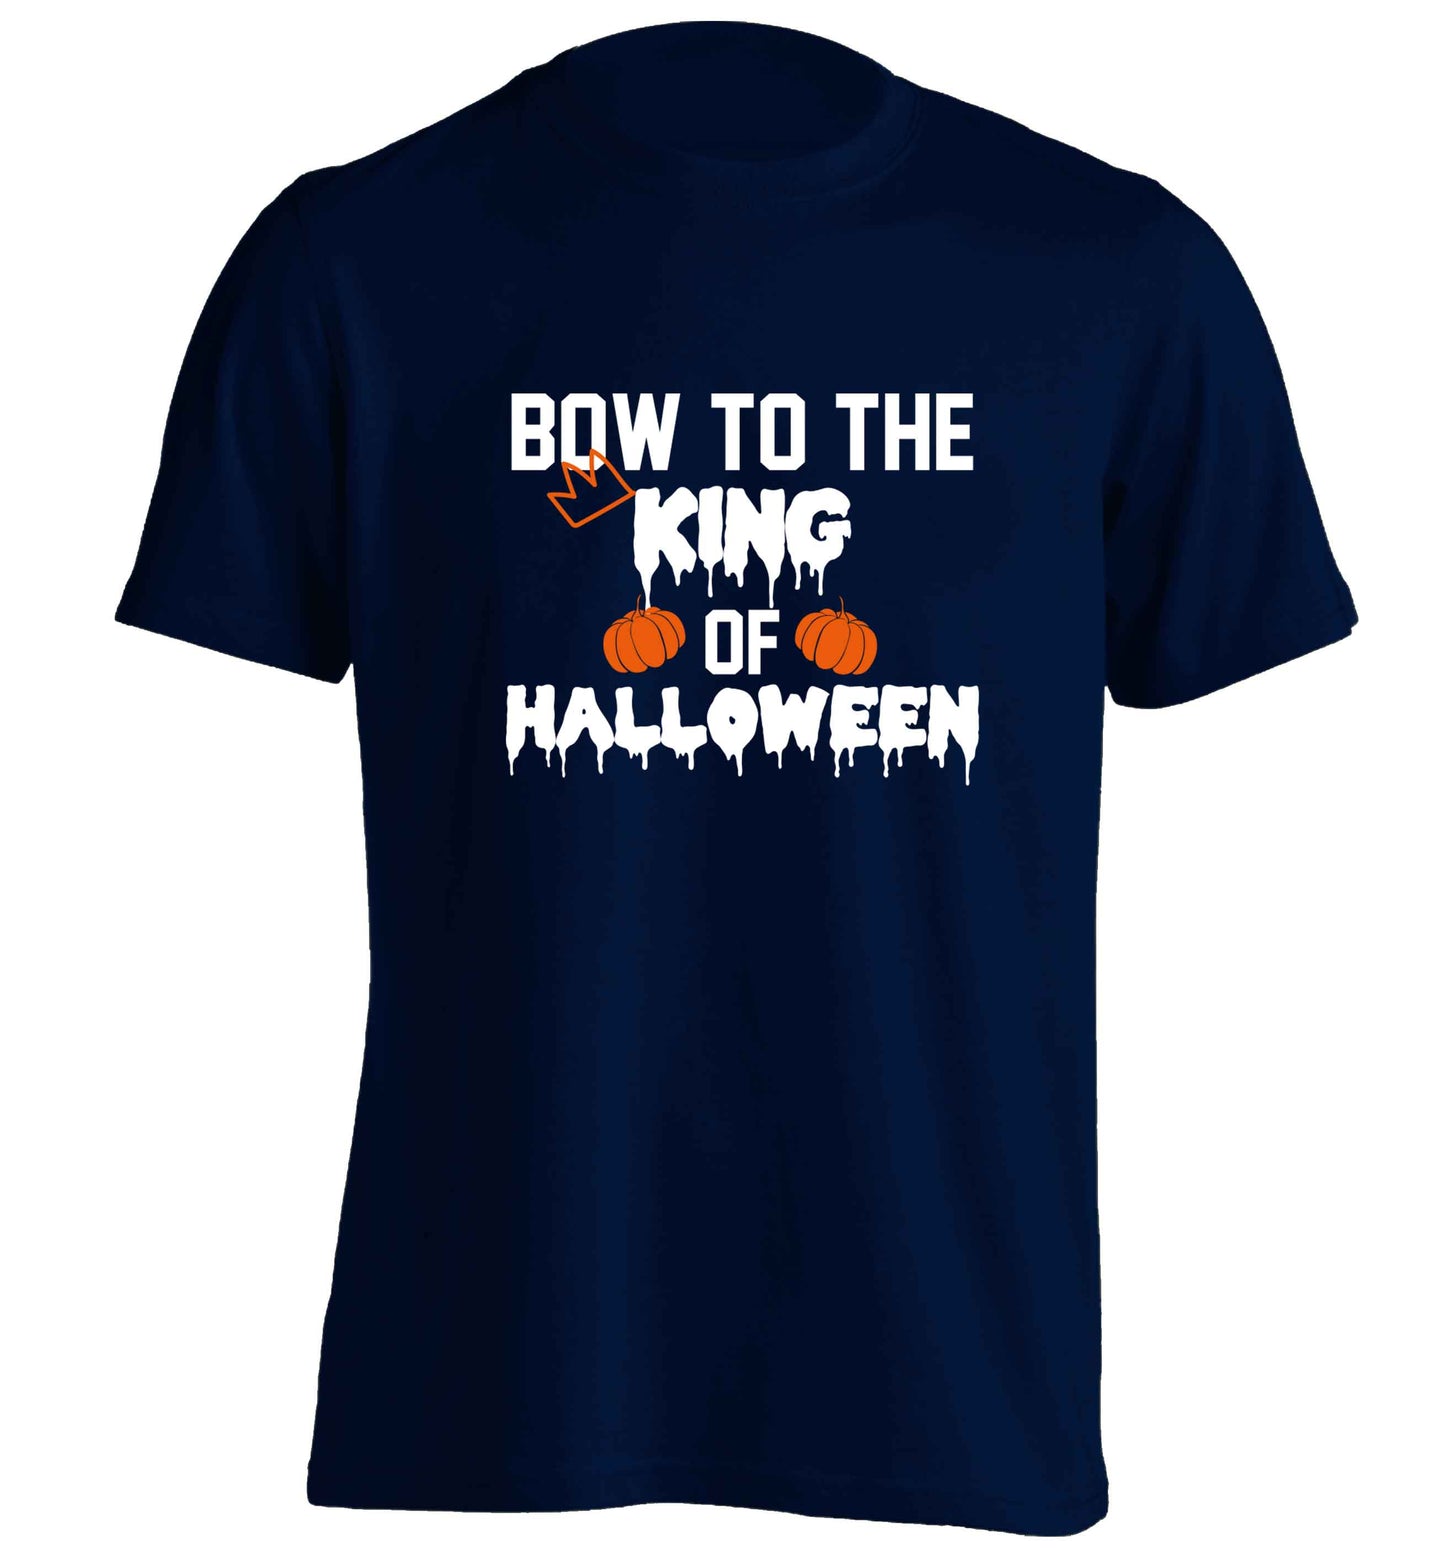 Bow to the King of halloween adults unisex navy Tshirt 2XL